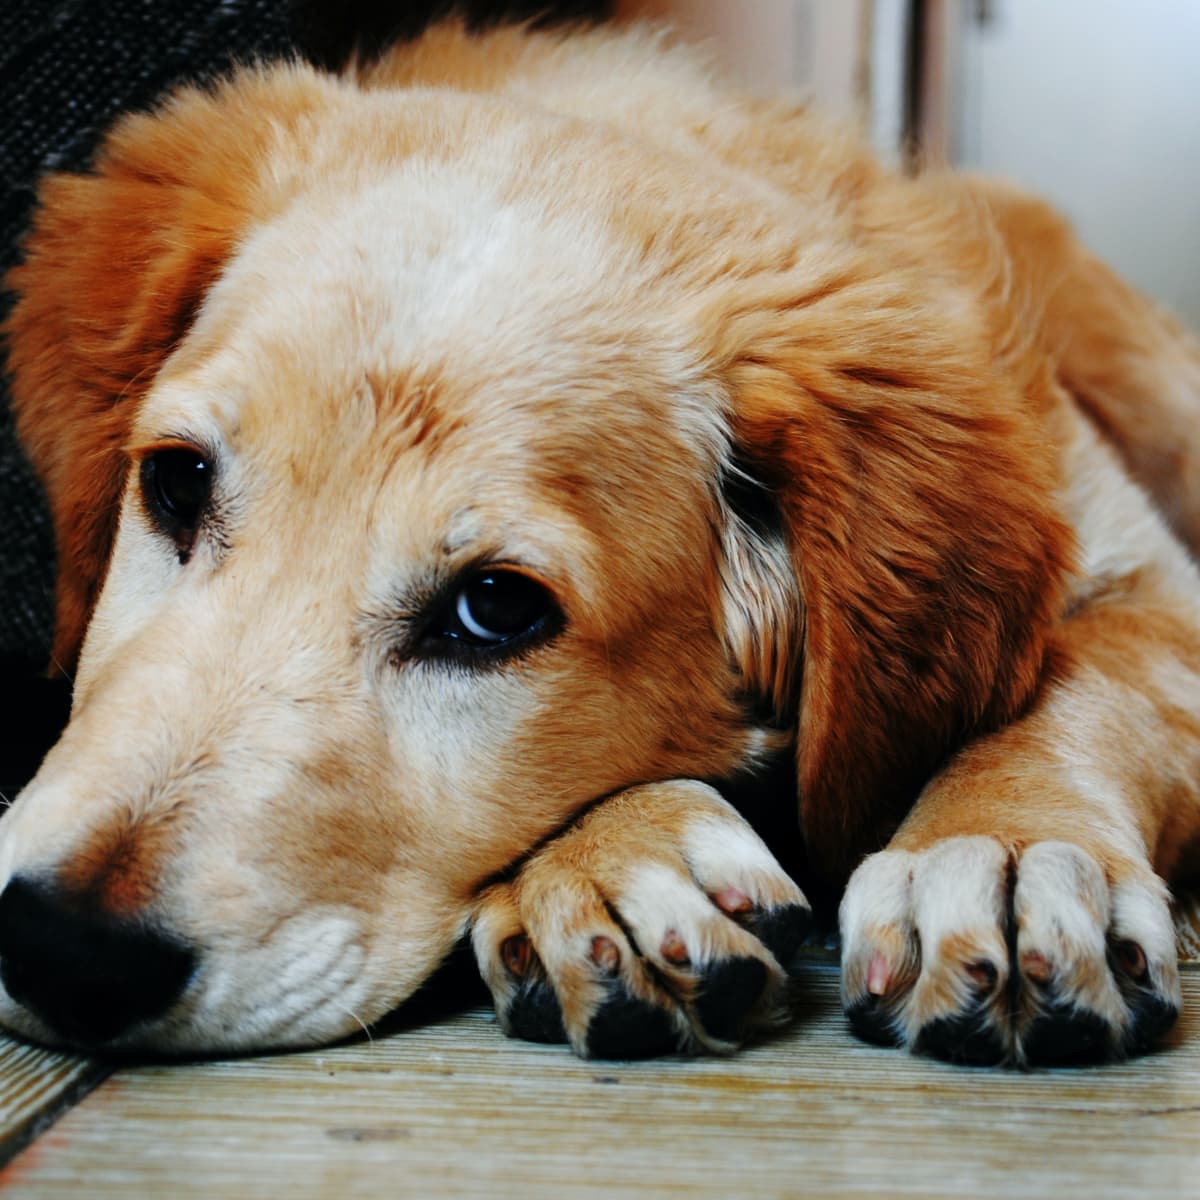 15 Signs A Dog Is Dying: What To Do When Your Dog'S Health Declines -  Pethelpful